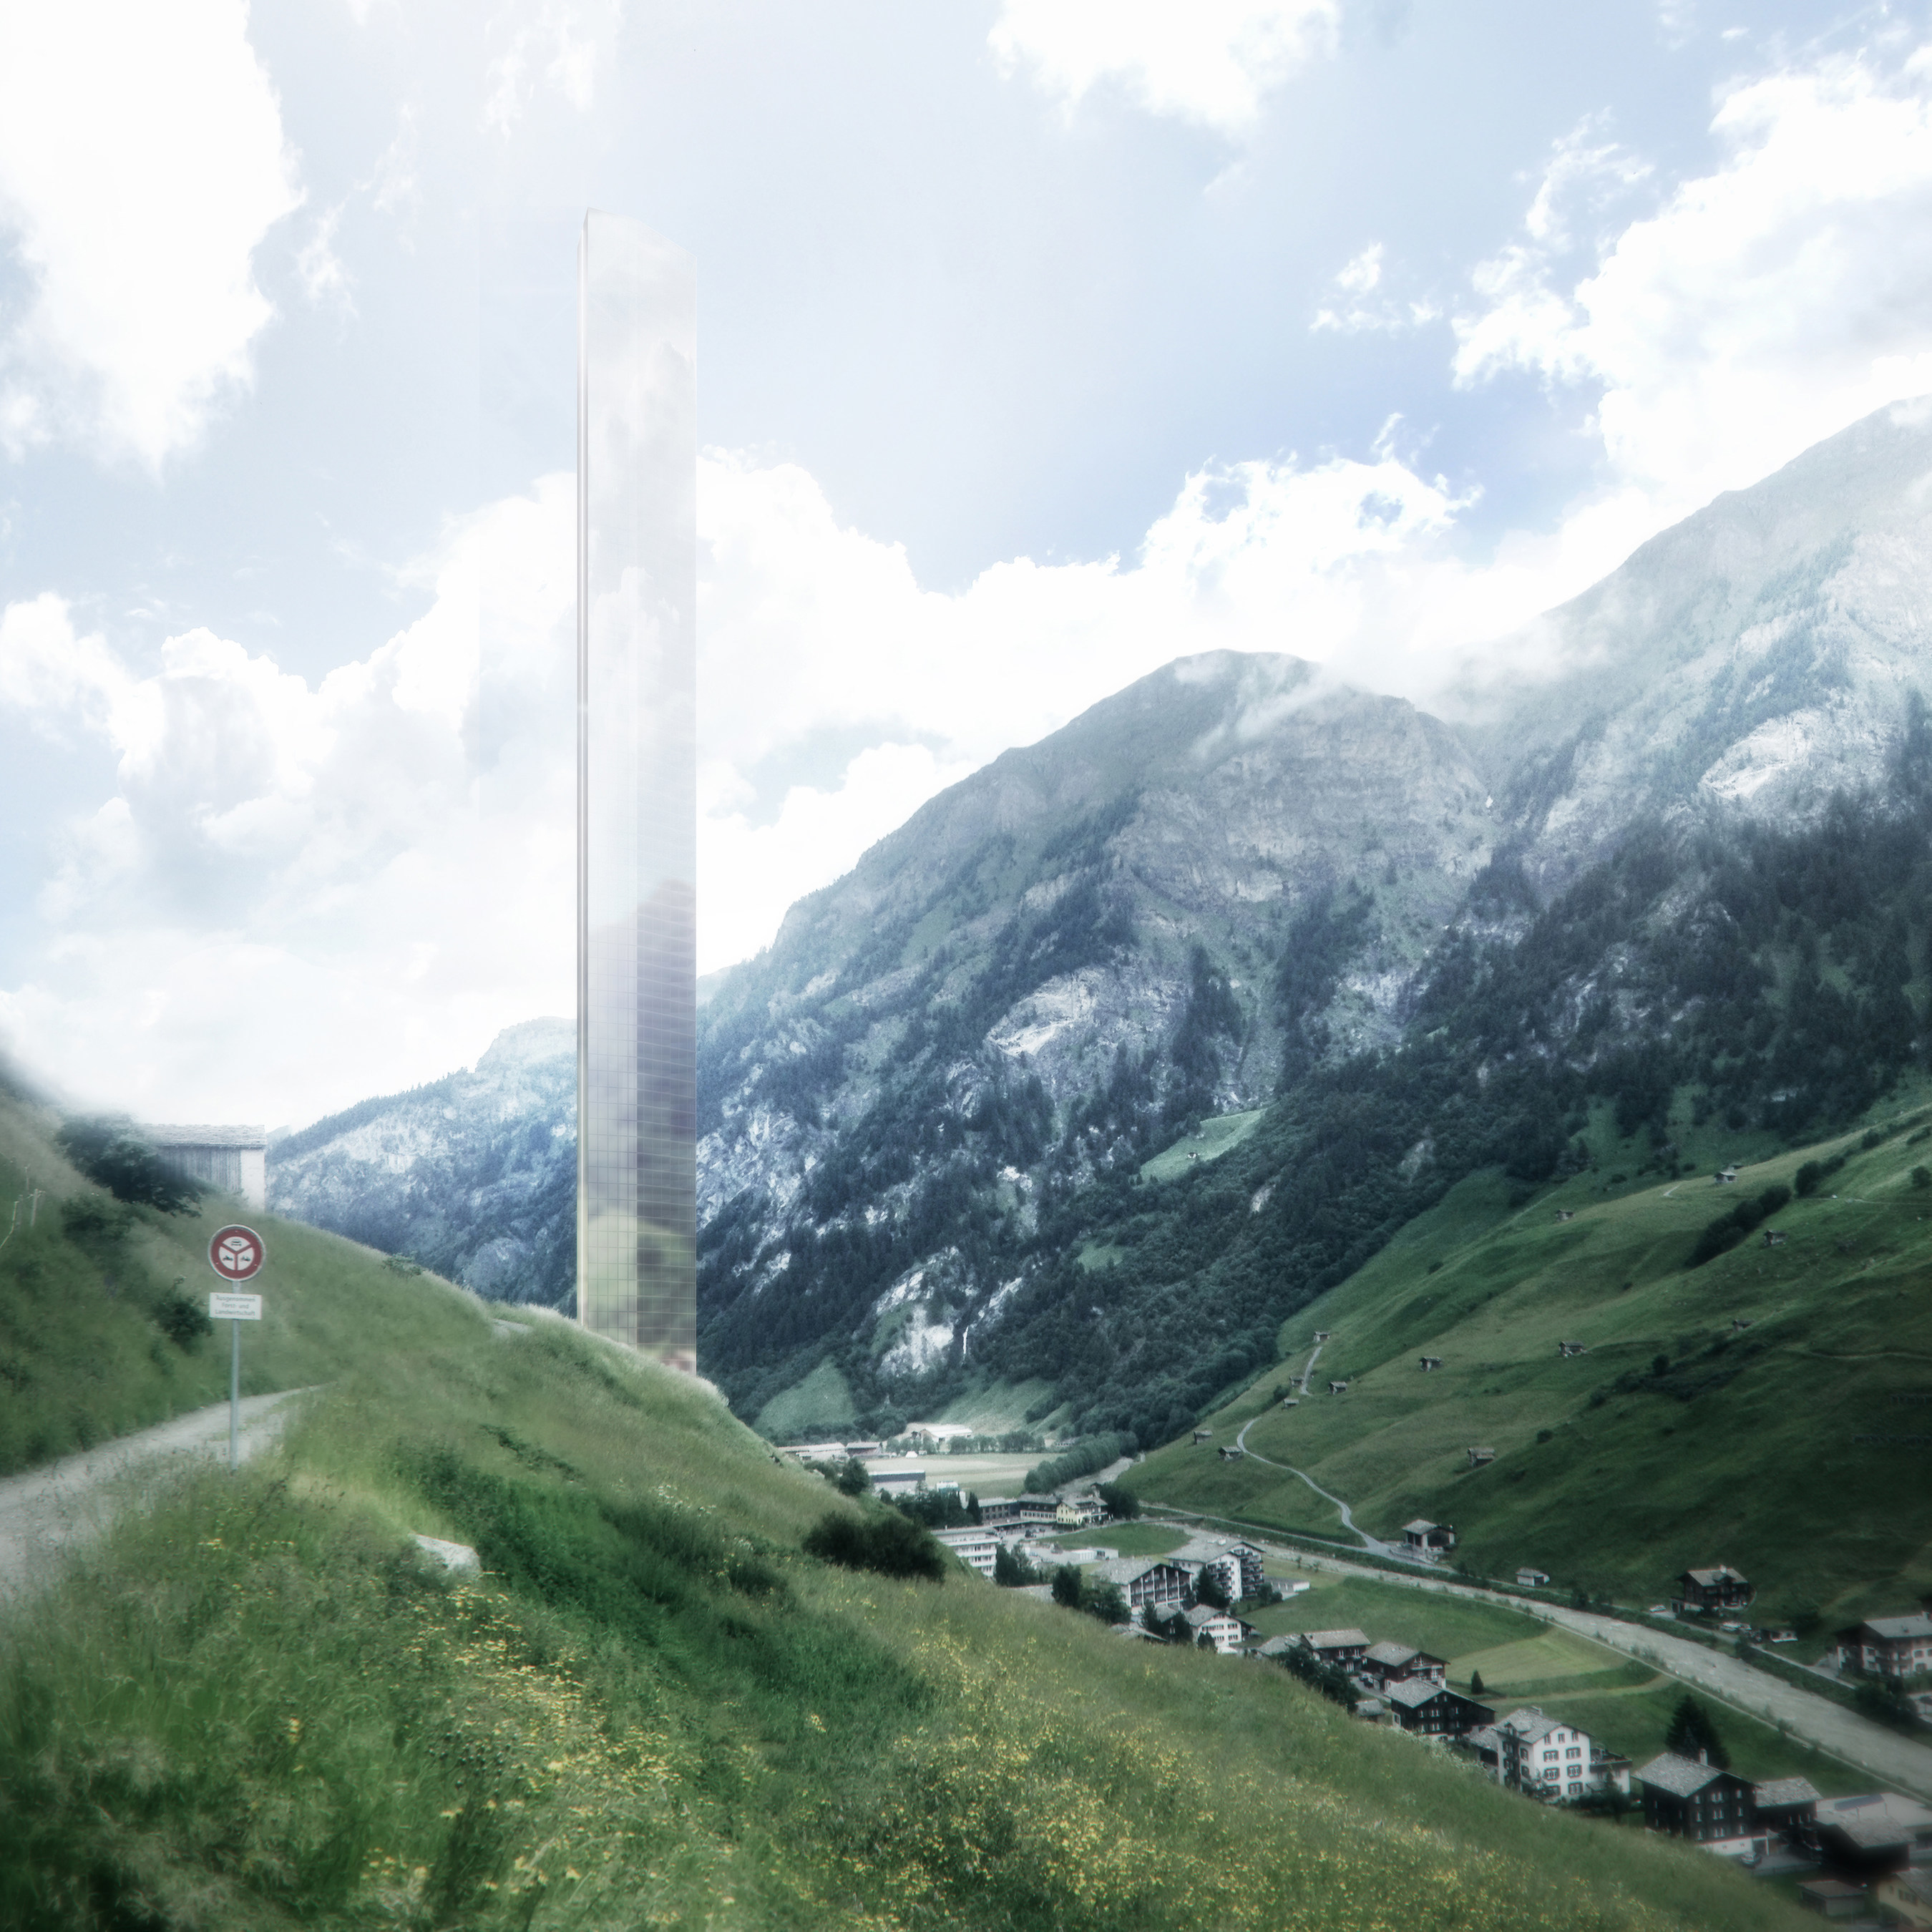 7132 Ltd in Partnership with Morphosis Architects, Unveils the Design for the New 7132 Hotel and Arrival in Vals, Switzerland